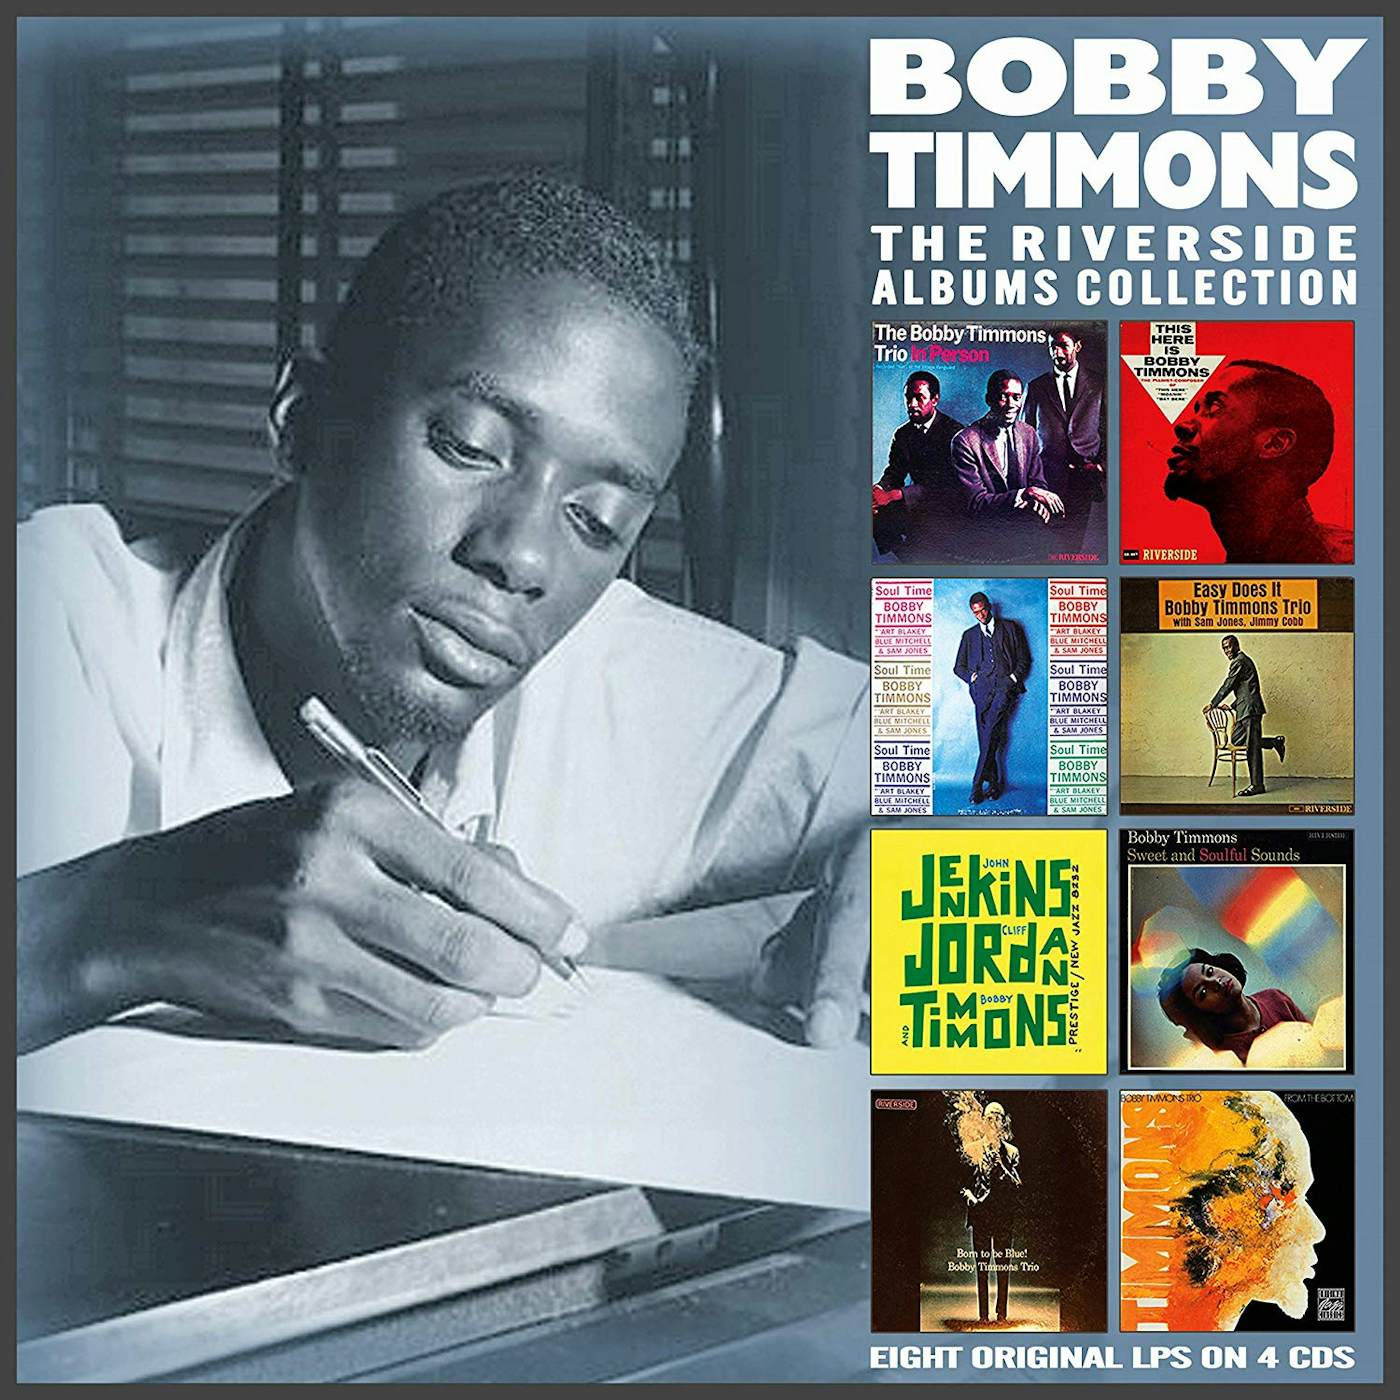 Bobby Timmons RIVERSIDE ALBUMS COLLECTION CD